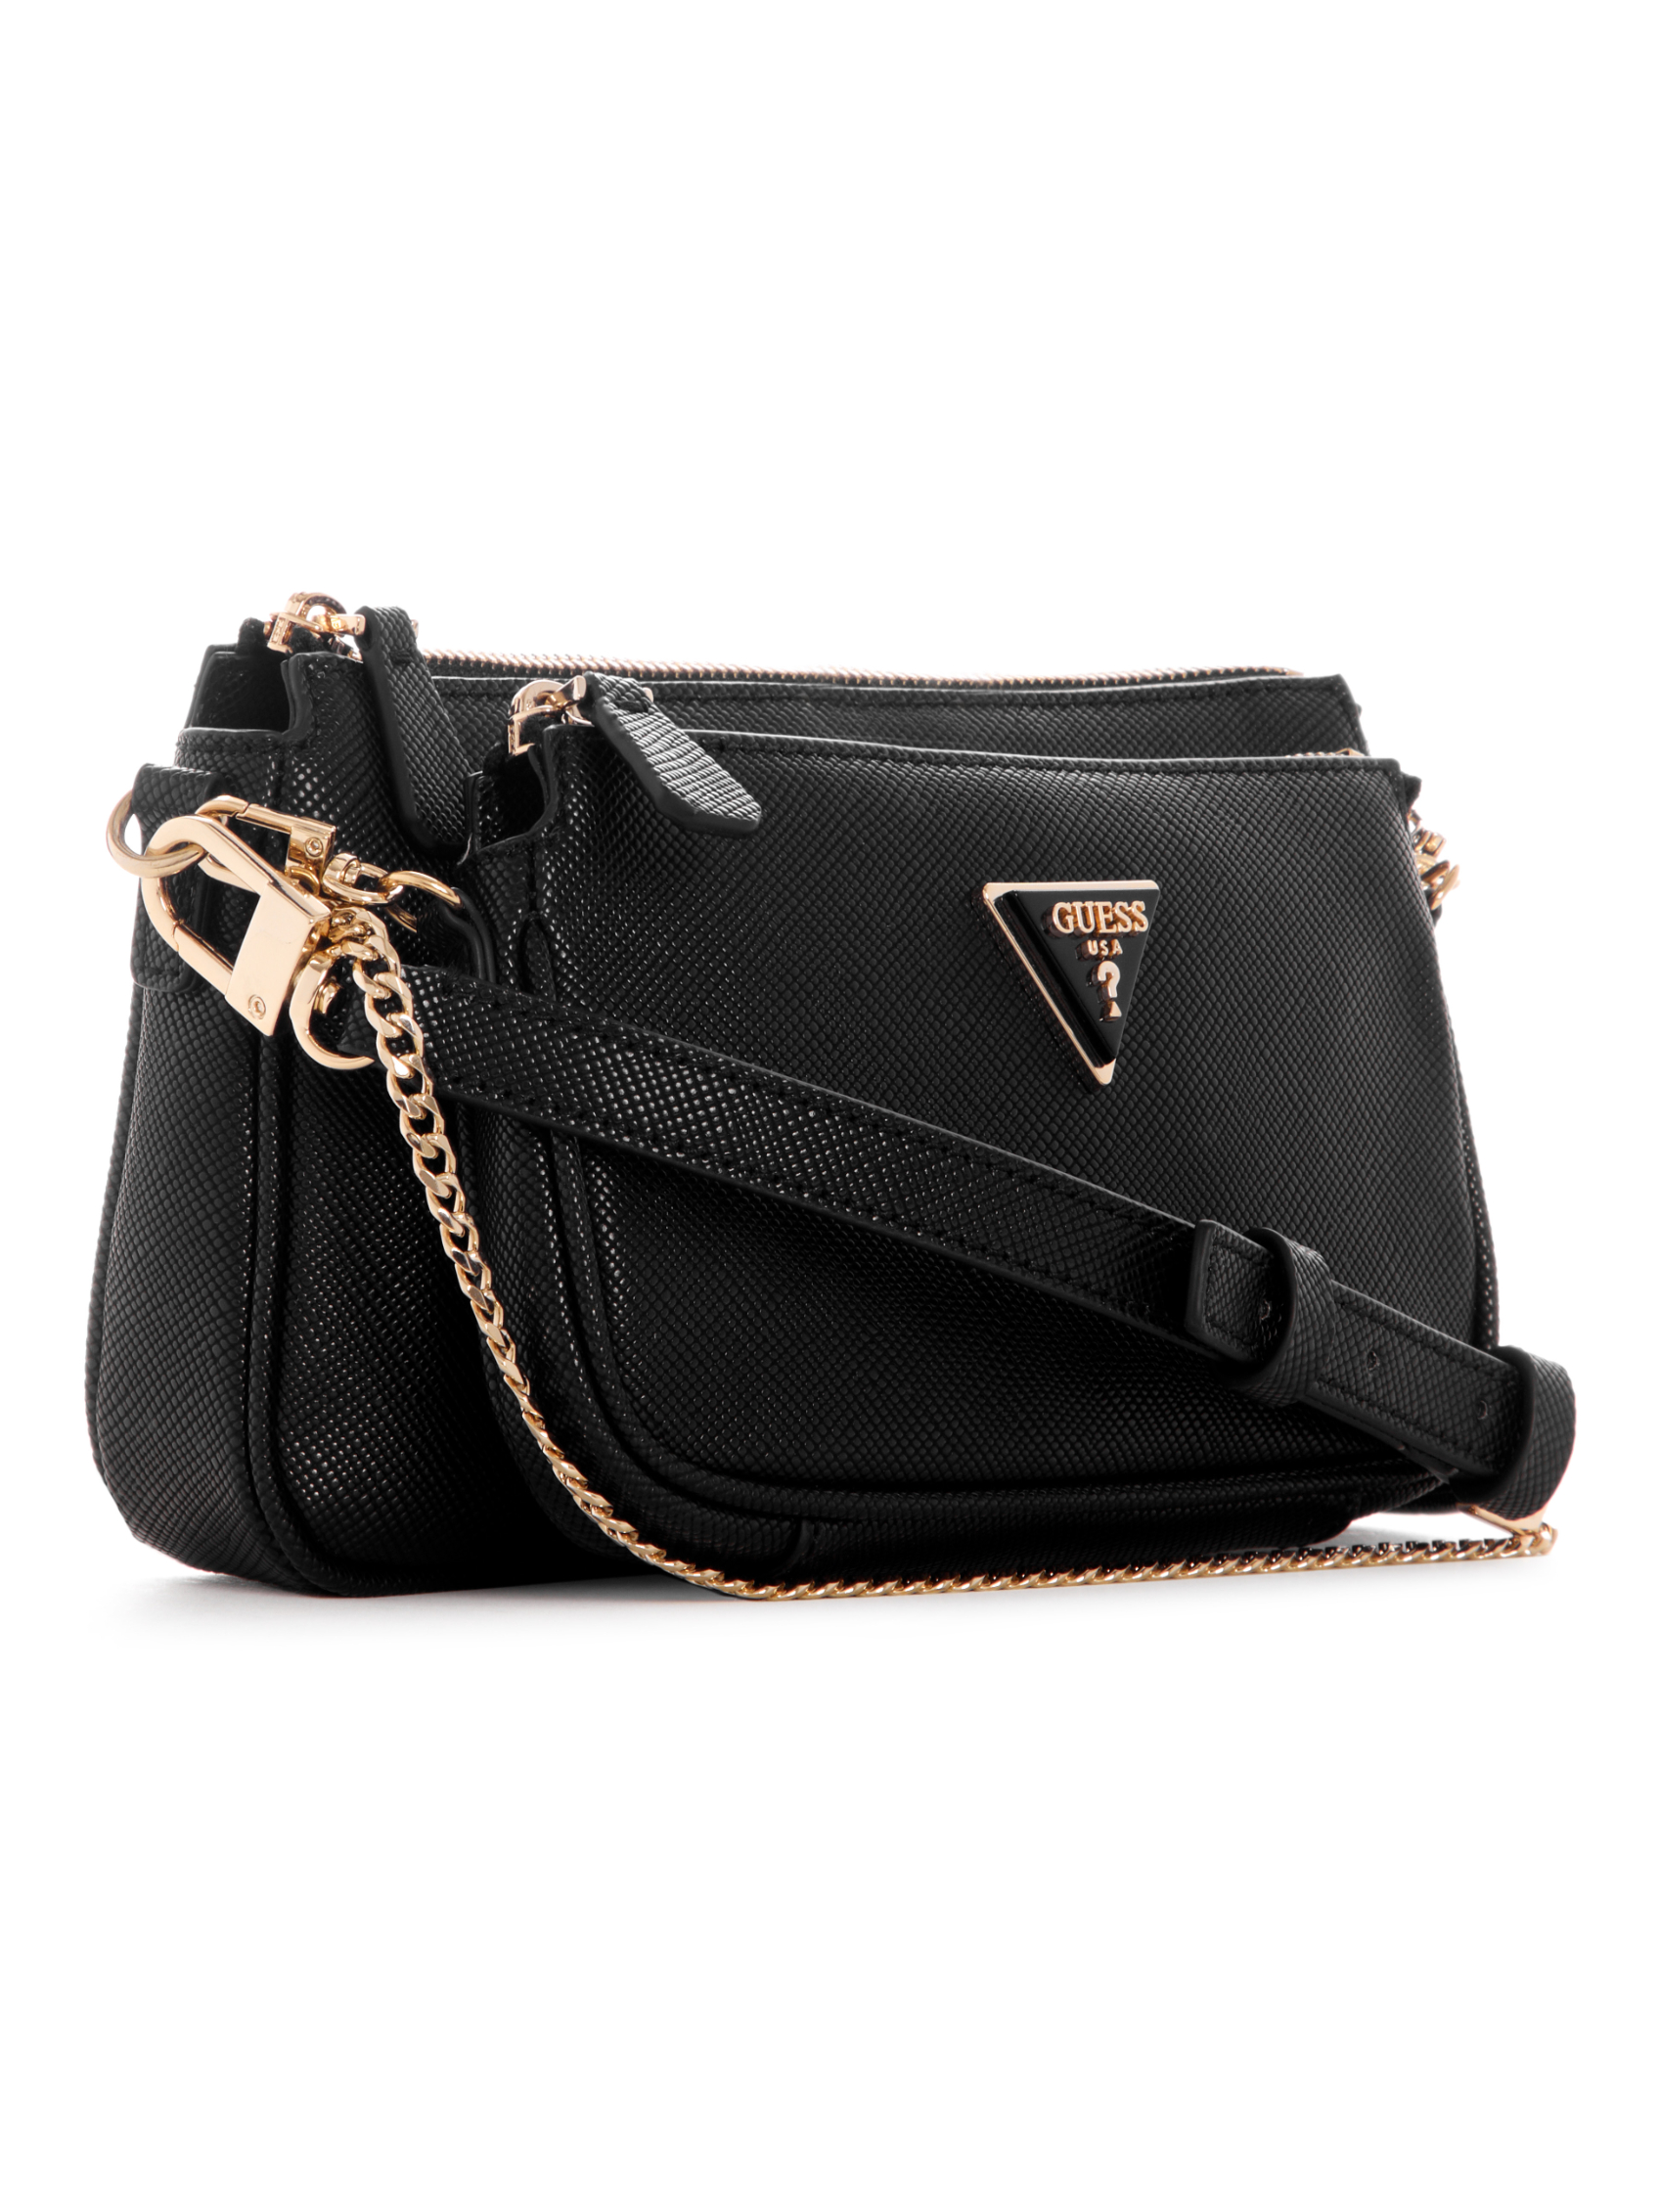 NOELLE DOUBLE POUCH CROSSBODY | Guess Philippines